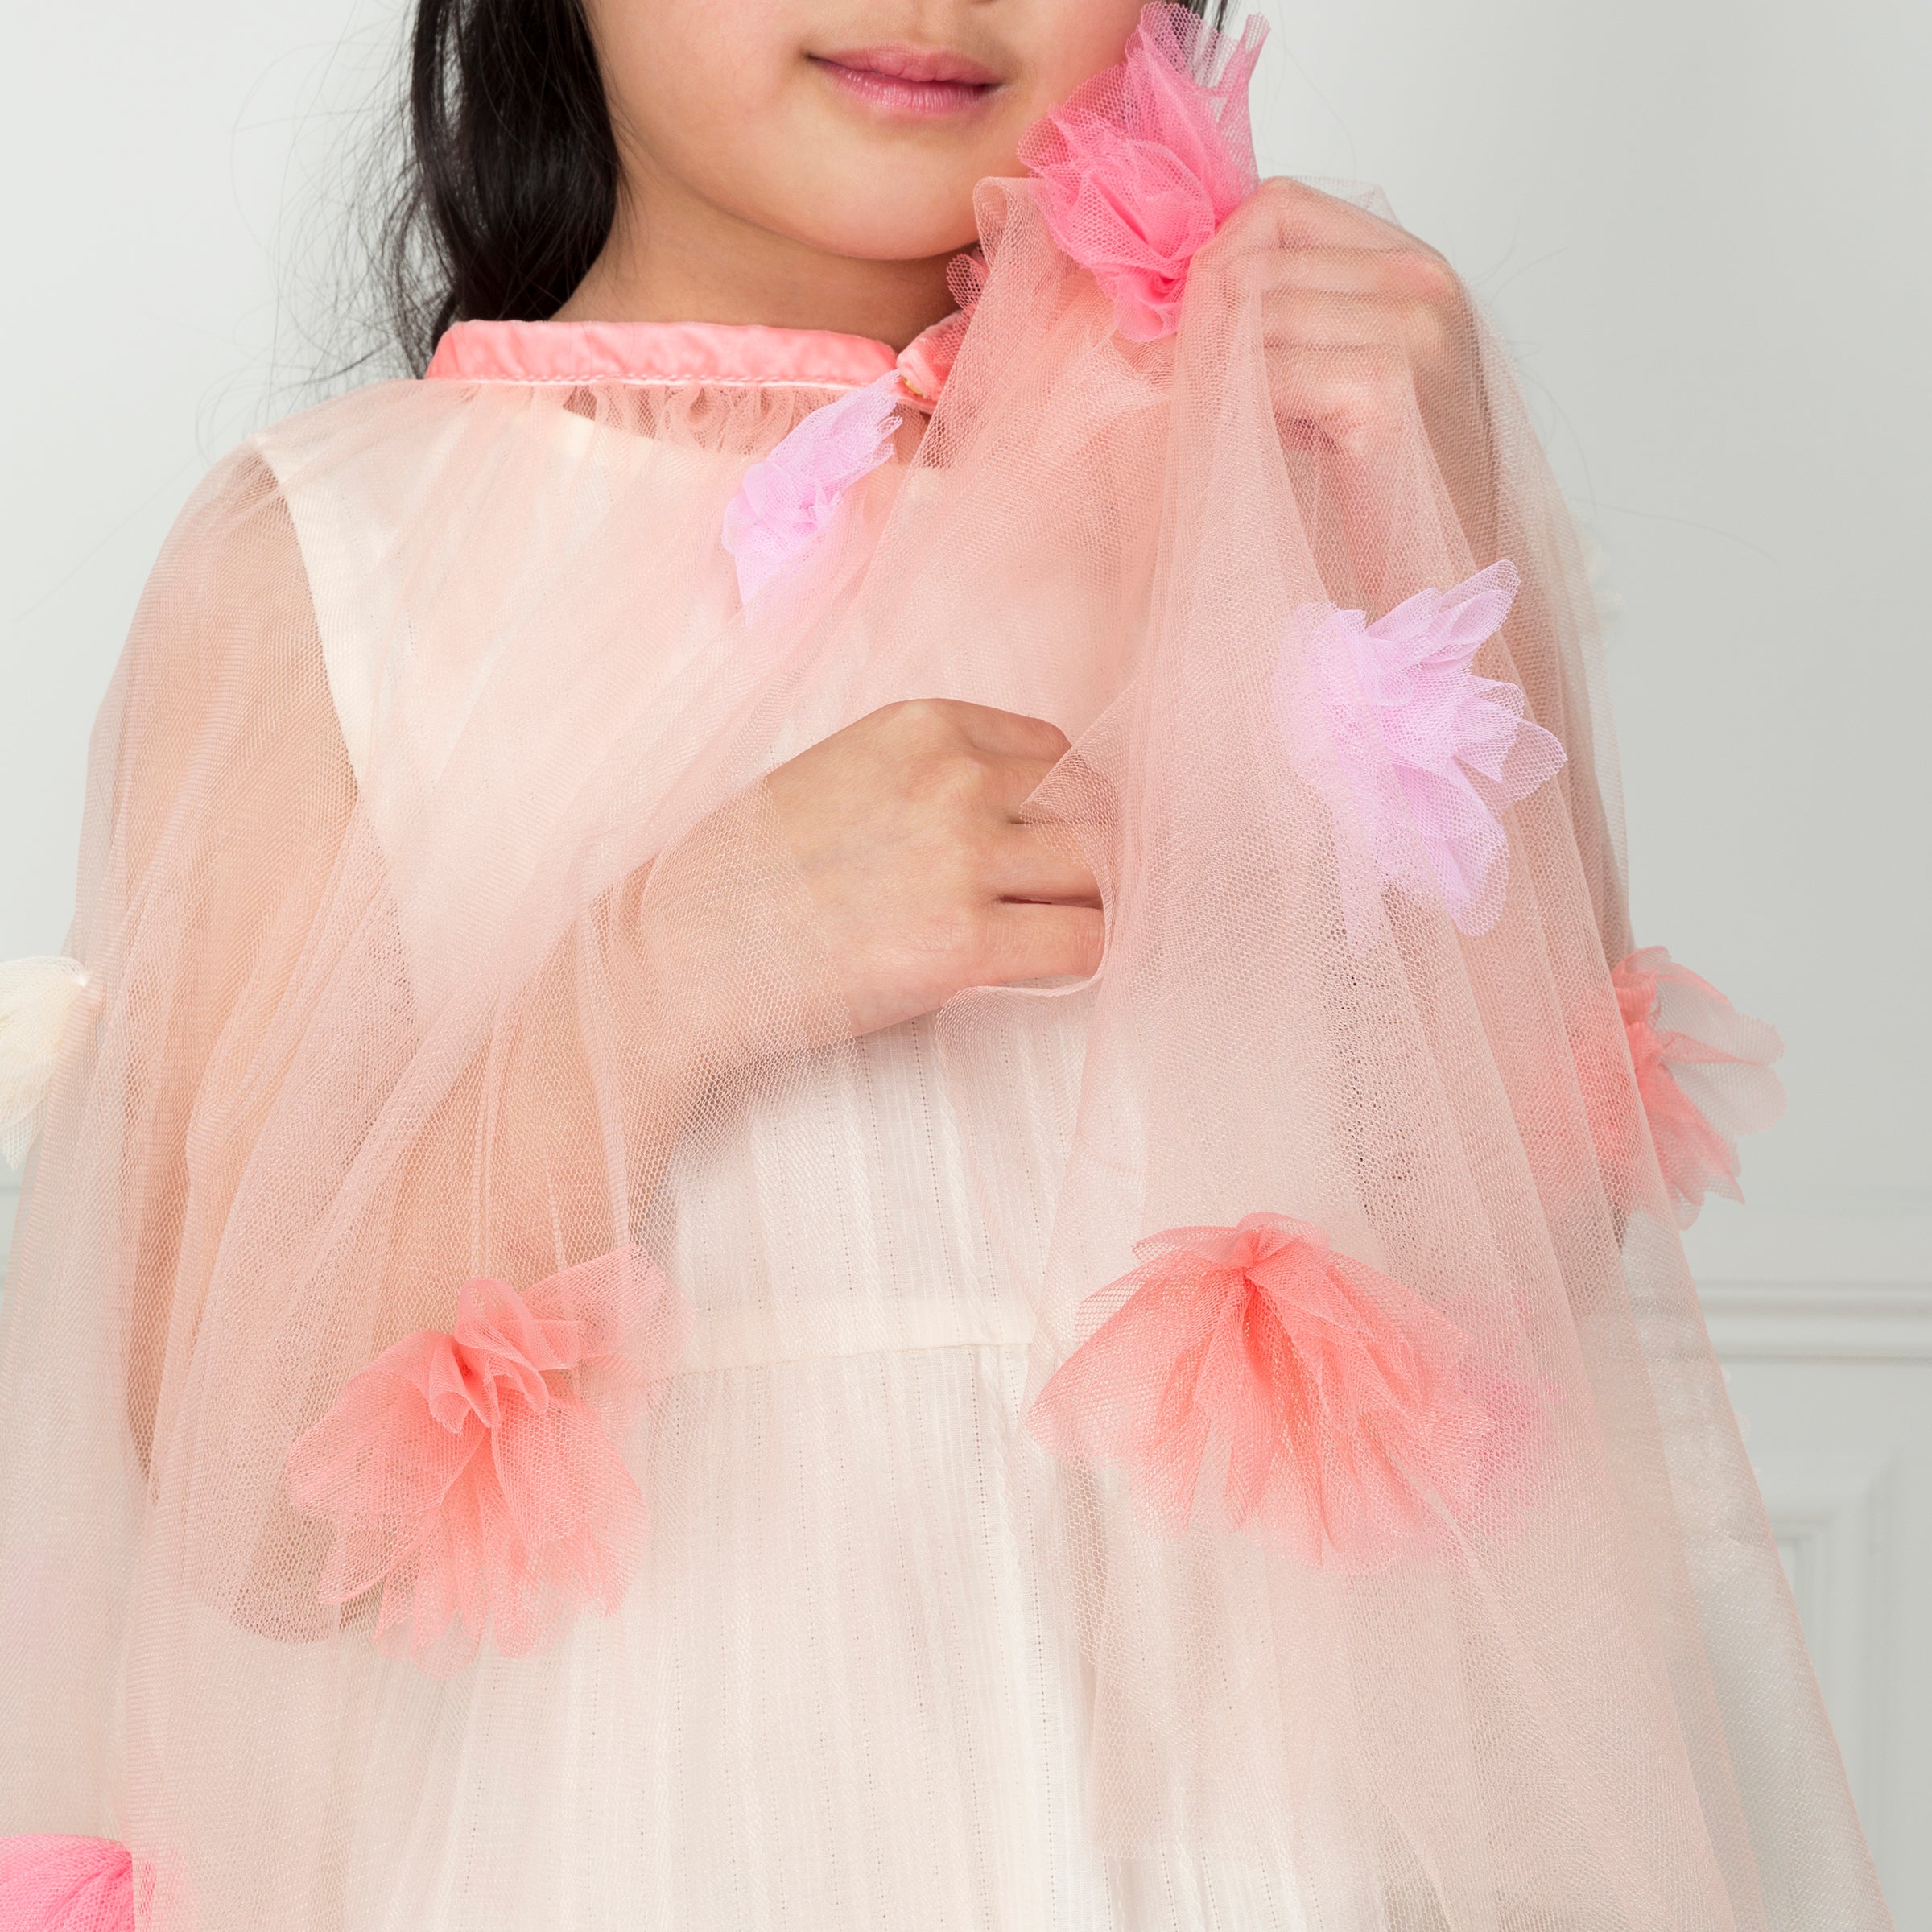 Our kids cape is crafted from tulle with tulle flower embellishments.